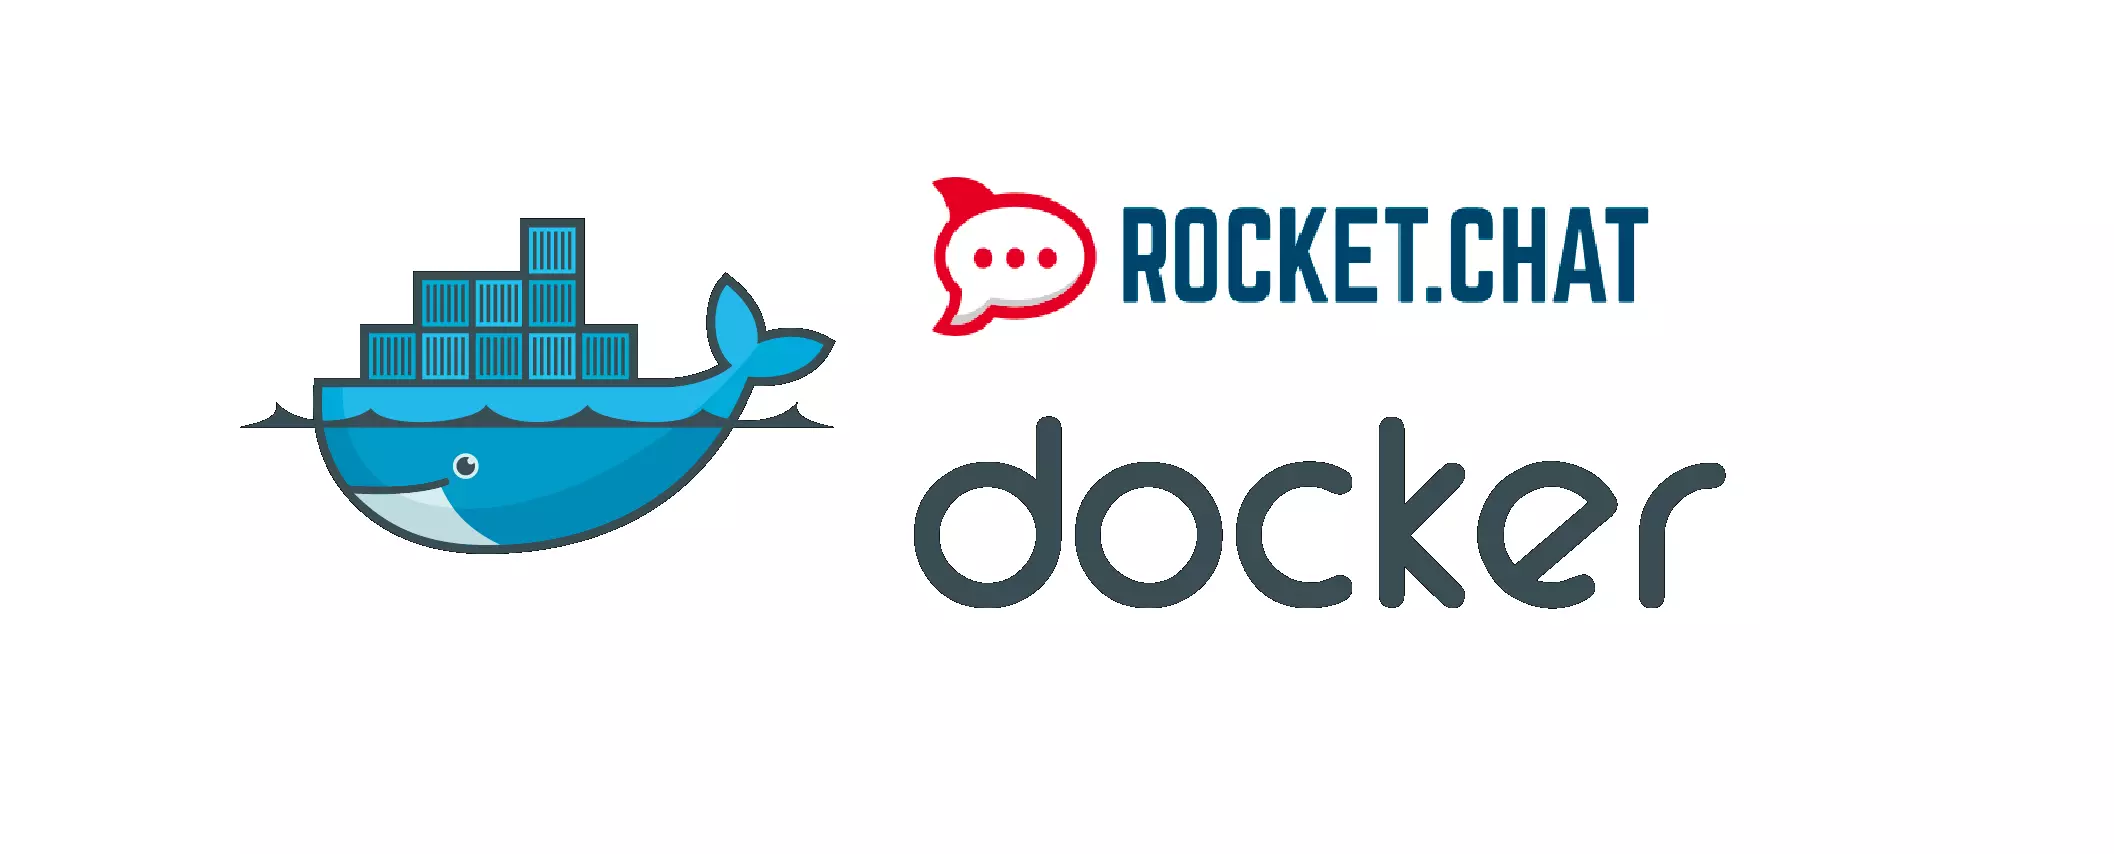 Upgrade Rocket.Chat from 3.x to 4.0, MongoDB from 4.0 to 5.0 via Docker